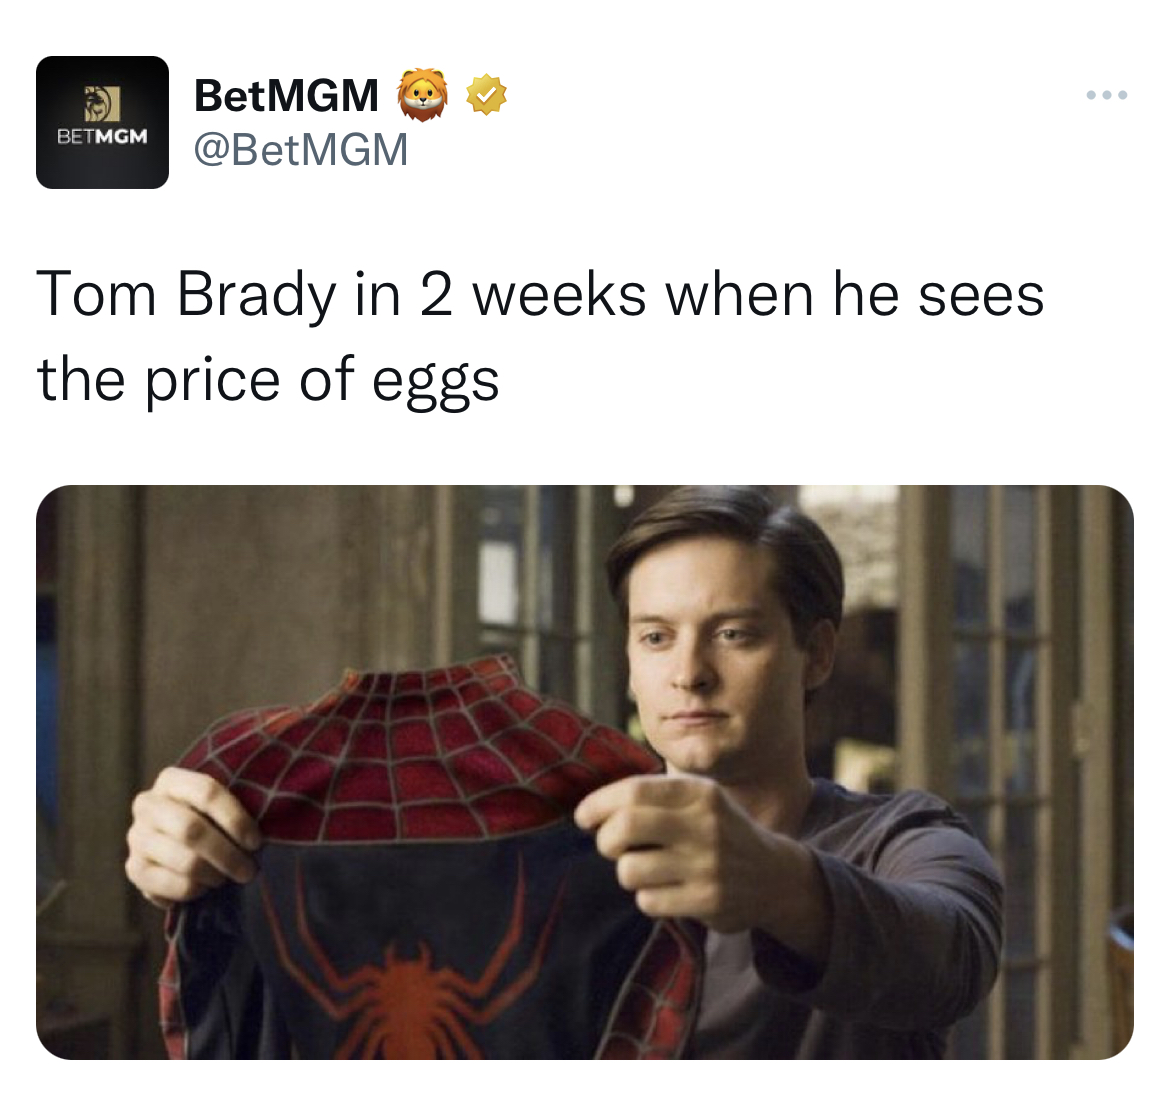 Tom Brady Retirement memes - spiderman 4 - Betmgm Bet Mgm dy in 2 weeks when he sees the price of eggs